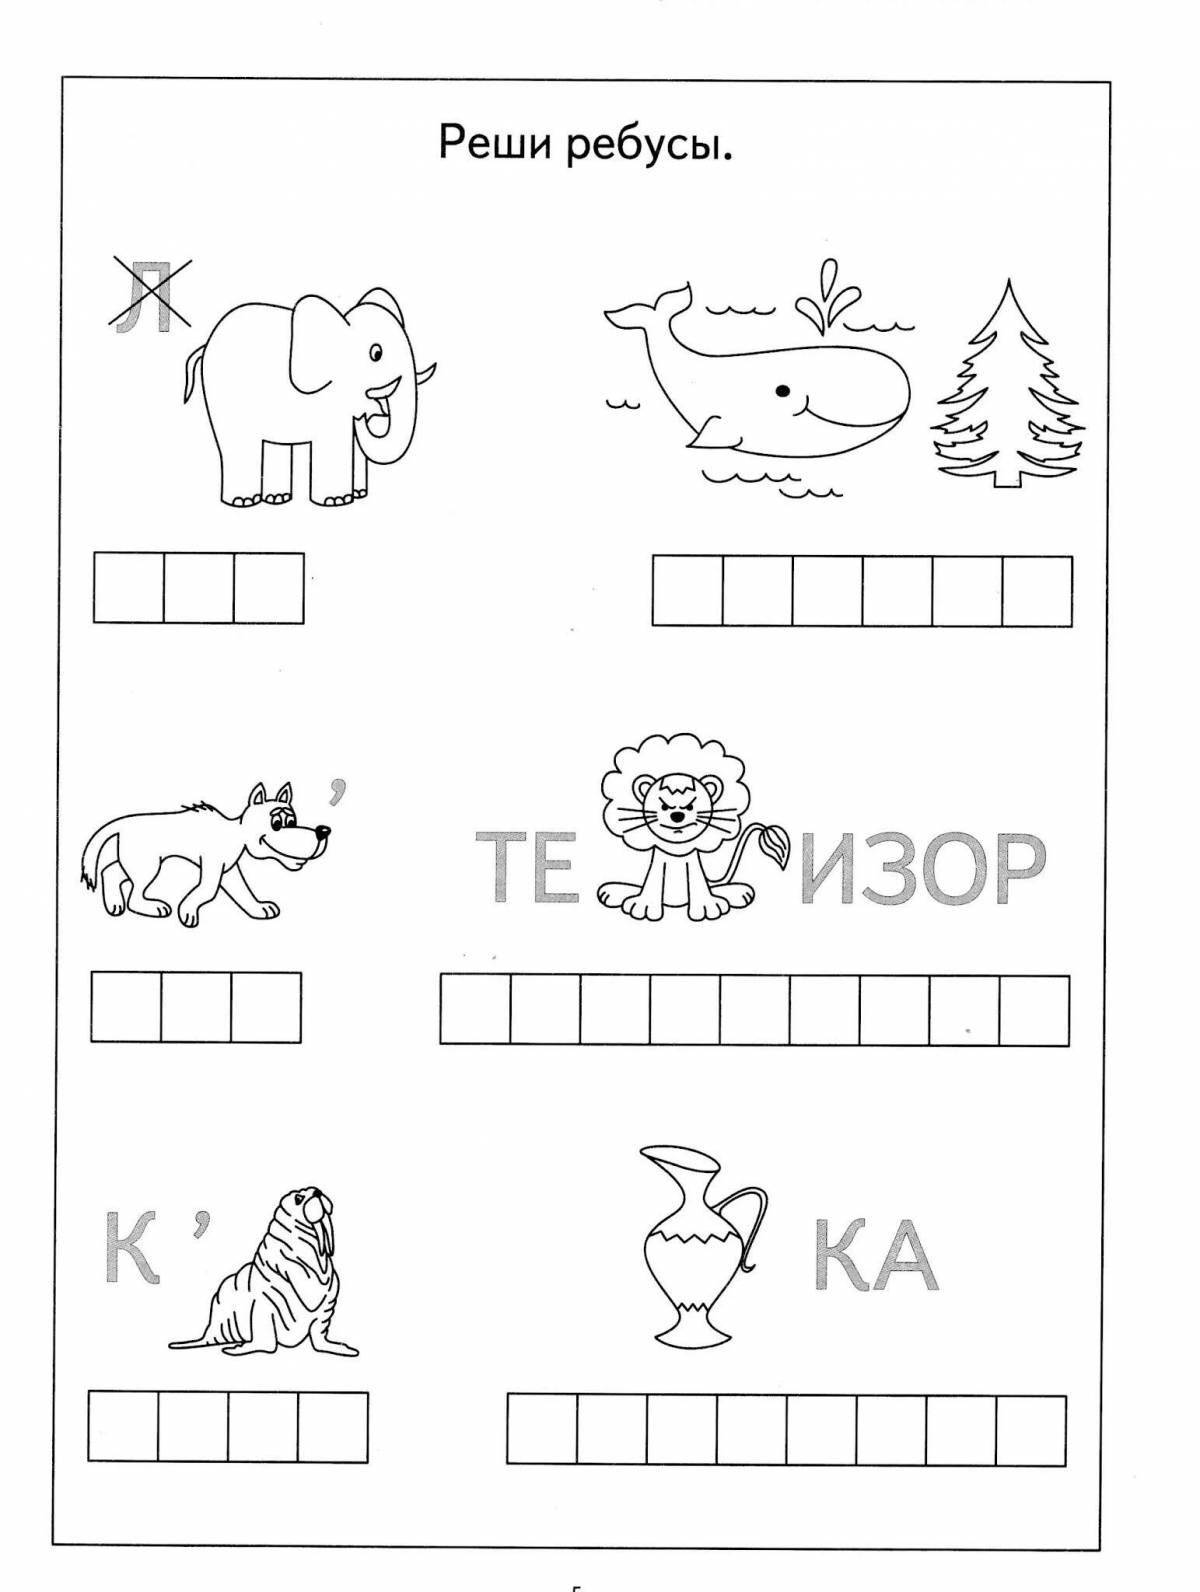 Stimulating puzzle coloring pages